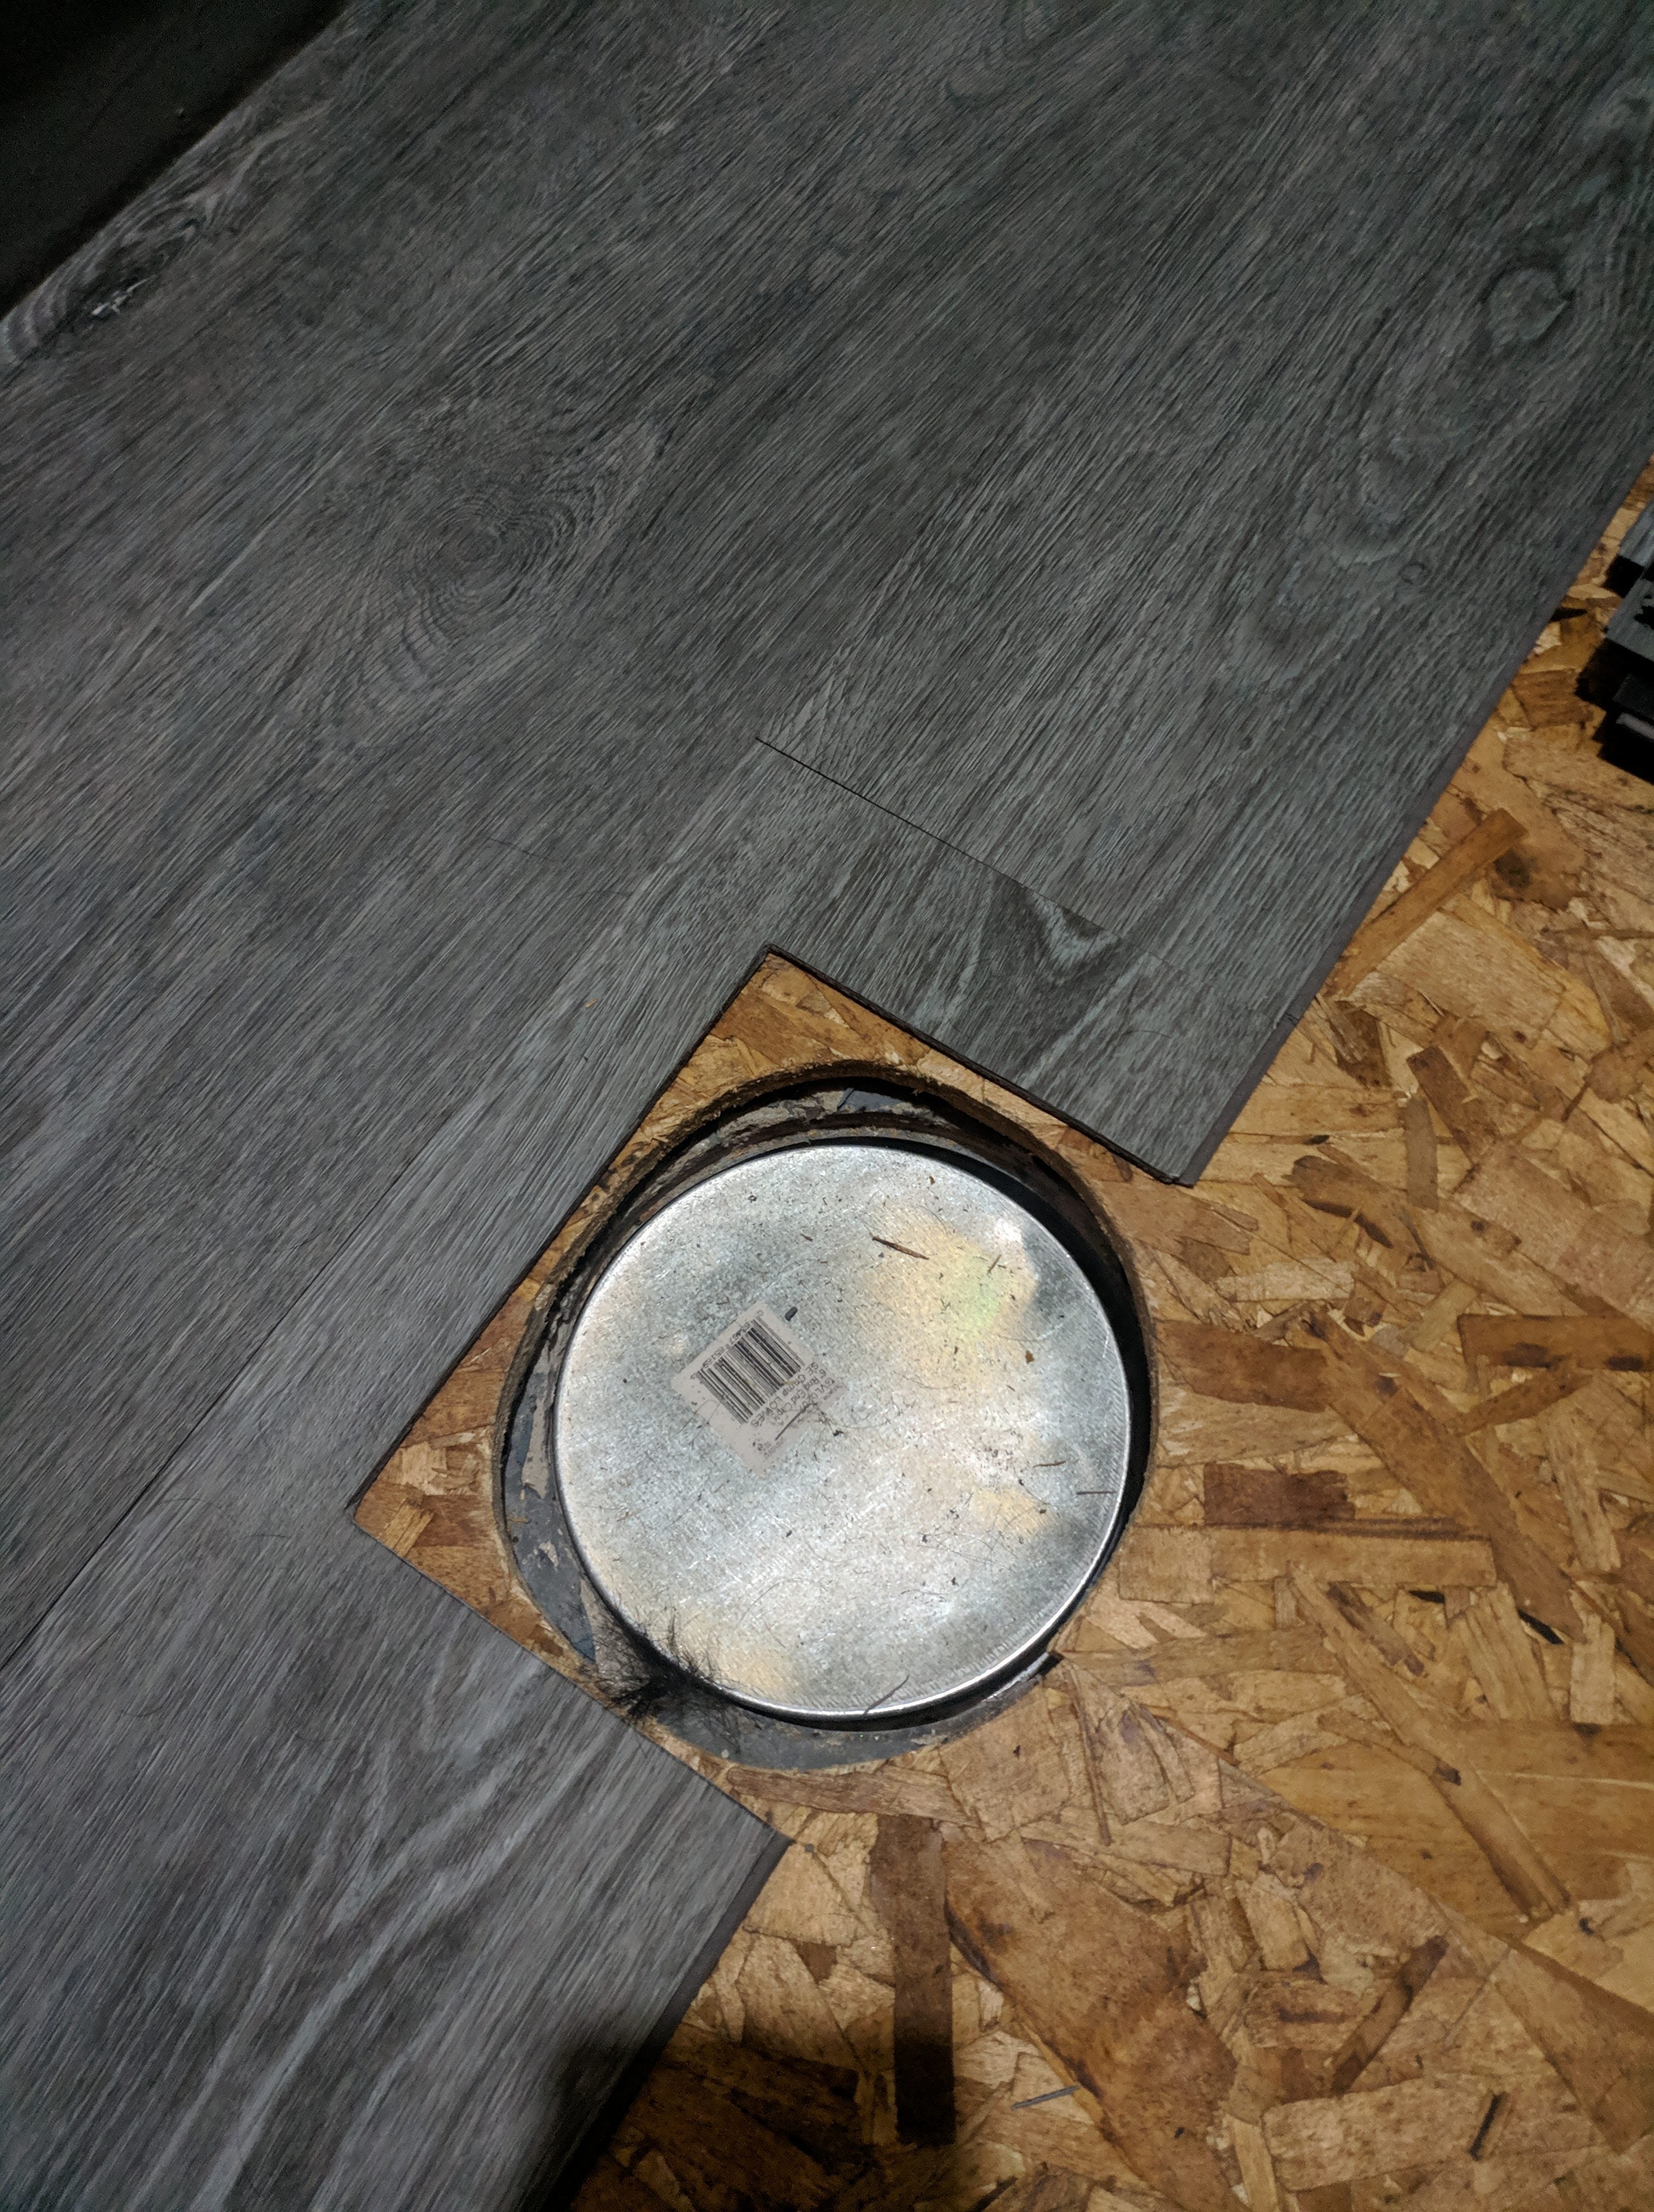 Access The Basement Floor Square Hole, How Do You Cut A Hole In Vinyl Plank Flooring